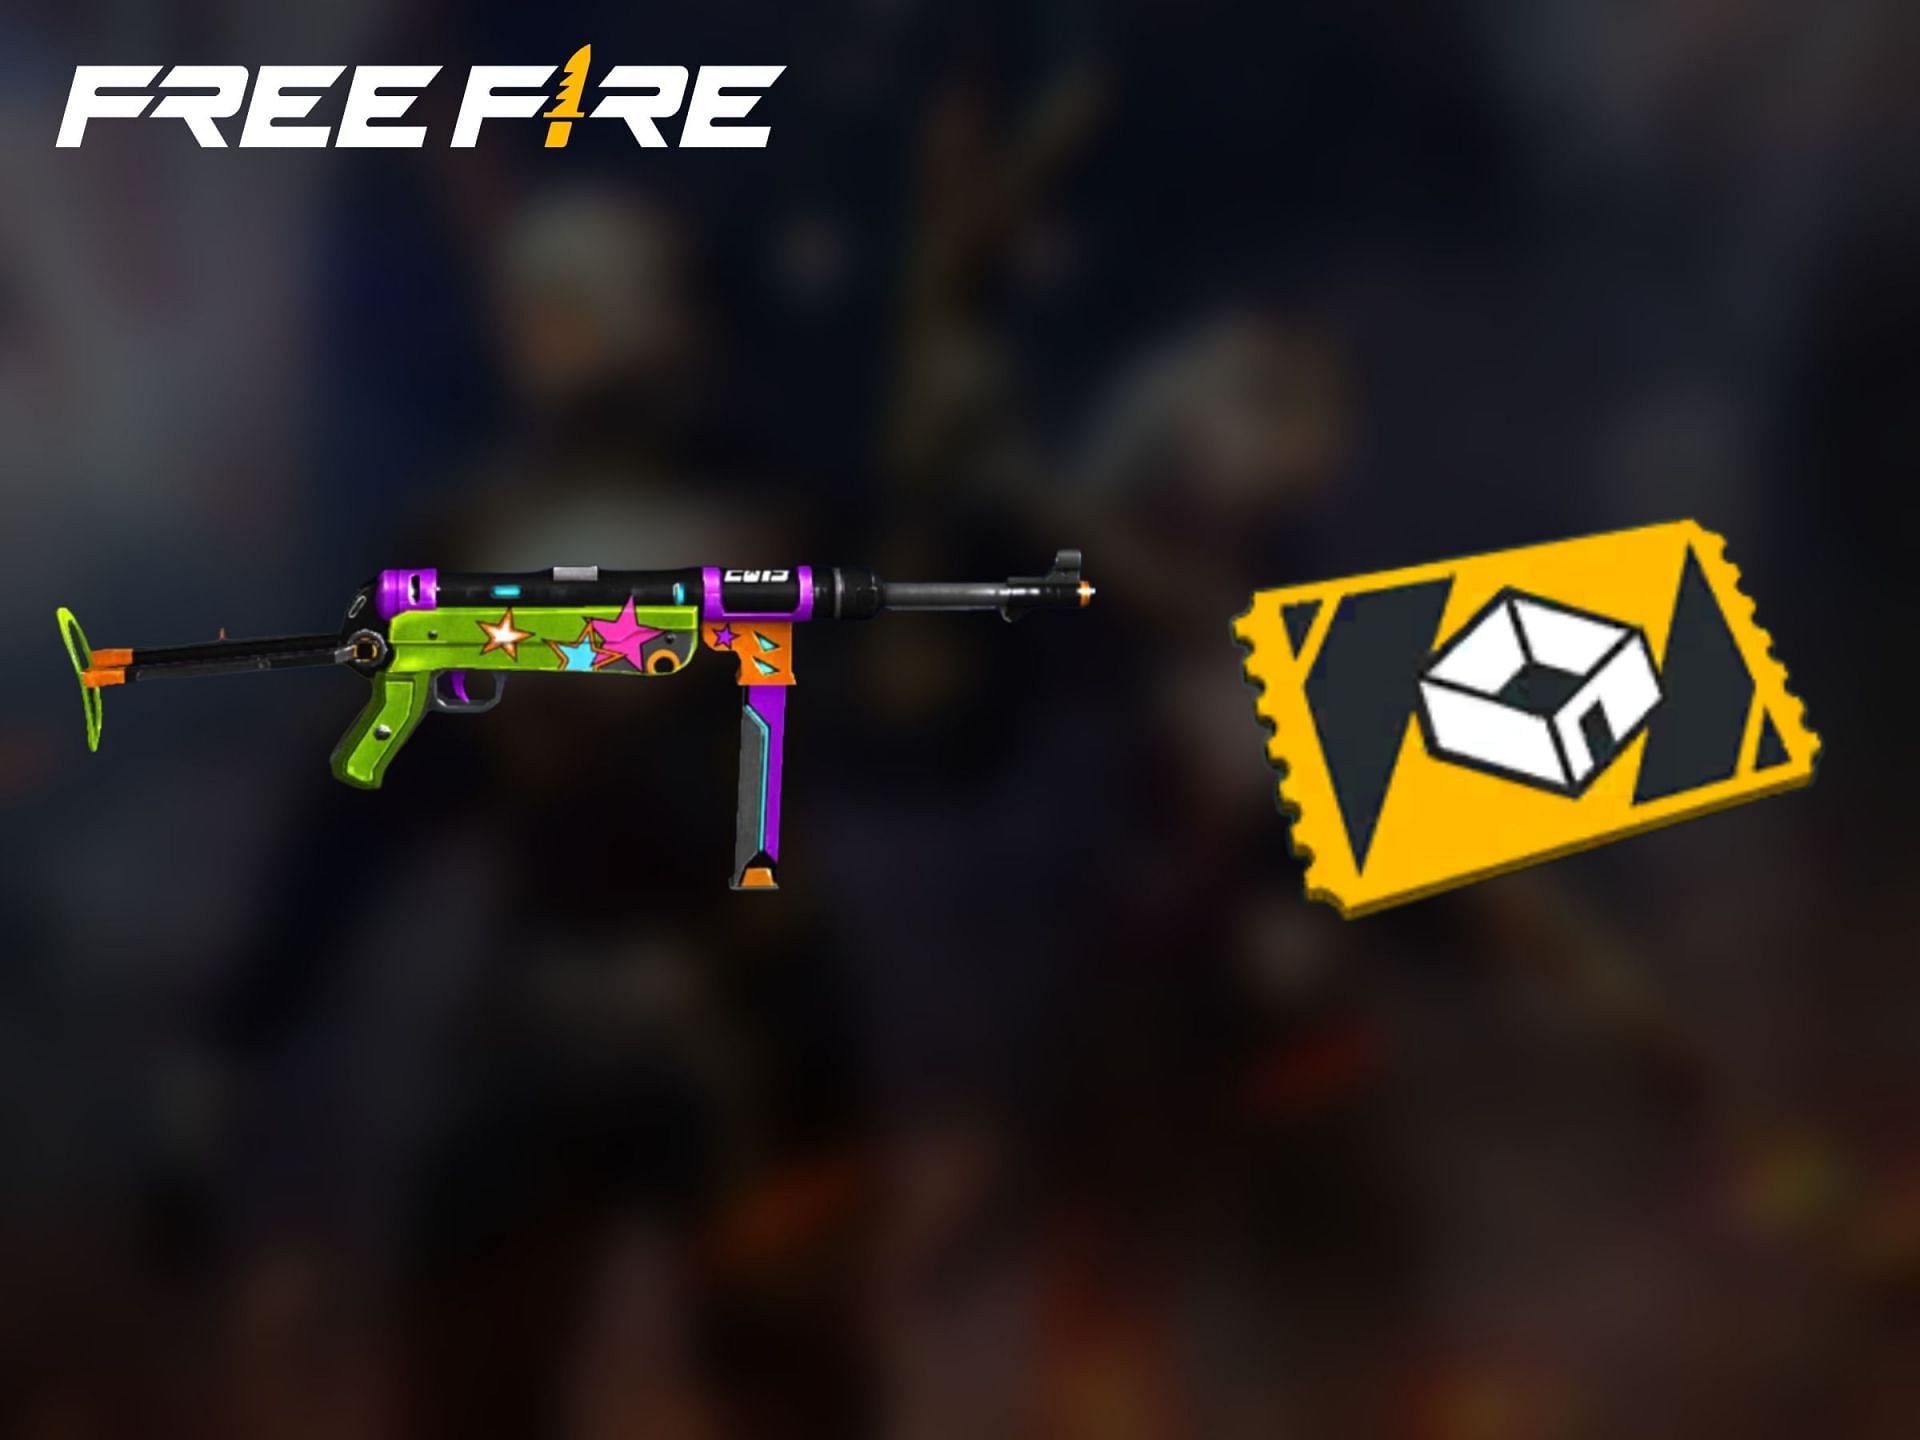 You can use Free Fire redeem codes and get free gun skins and room cards (Image via Sportskeeda)